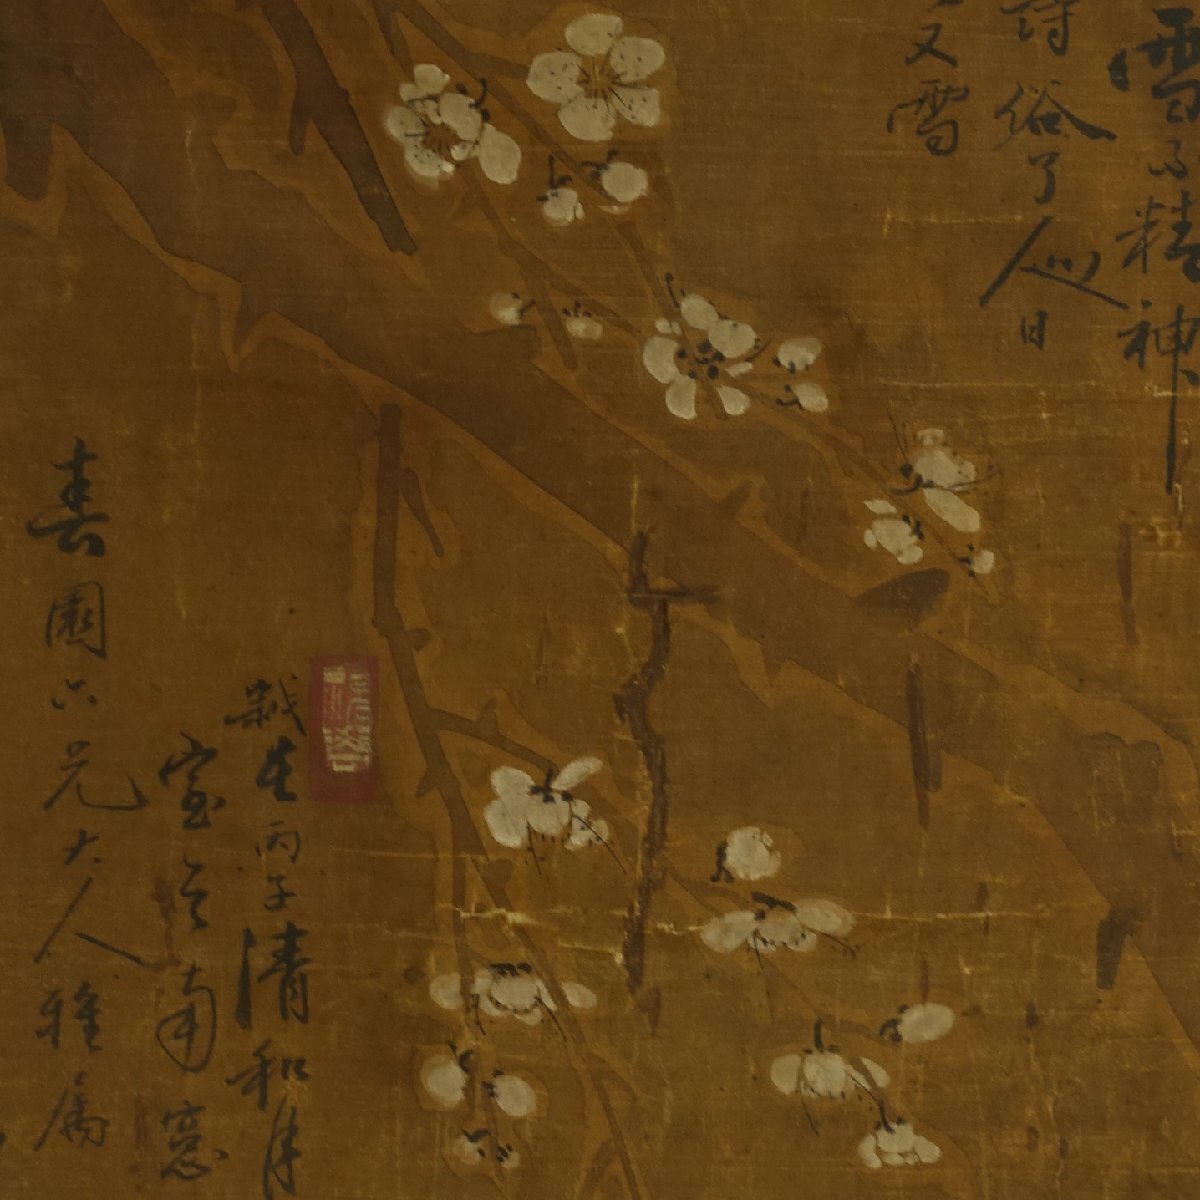 [ copy ]..*[. sphere . plum flower map . poetry writing .] 1 width old writing brush old document old book Japanese picture China picture China paper . morning . picture morning .. Joseon Dynasty picture . flower map tea ceremony Kiyoshi fee 